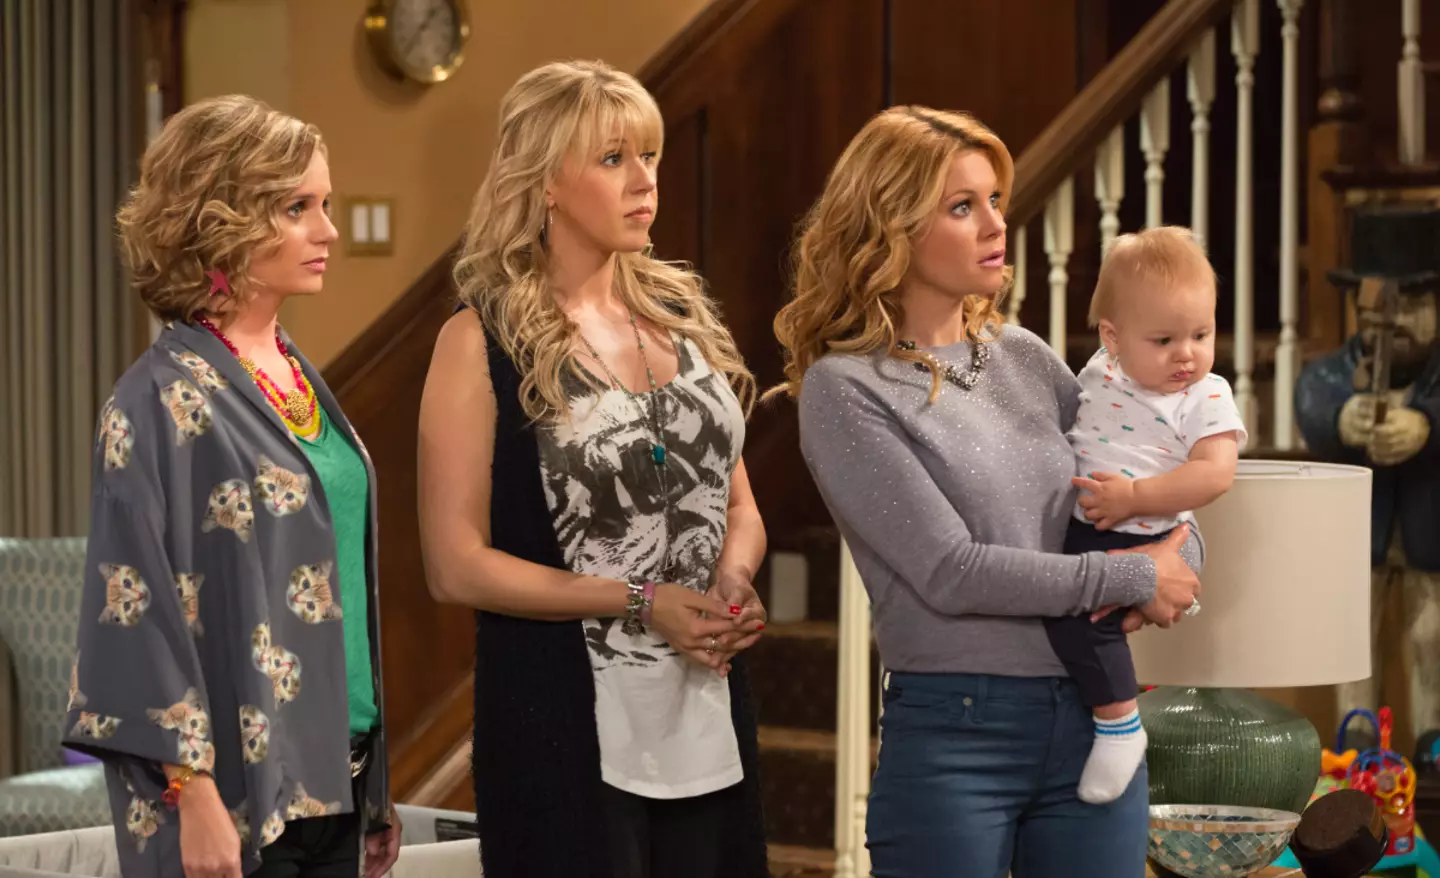 Fuller House returned with a reboot in 2016, but the Olsen twins were nowhere to be seen.